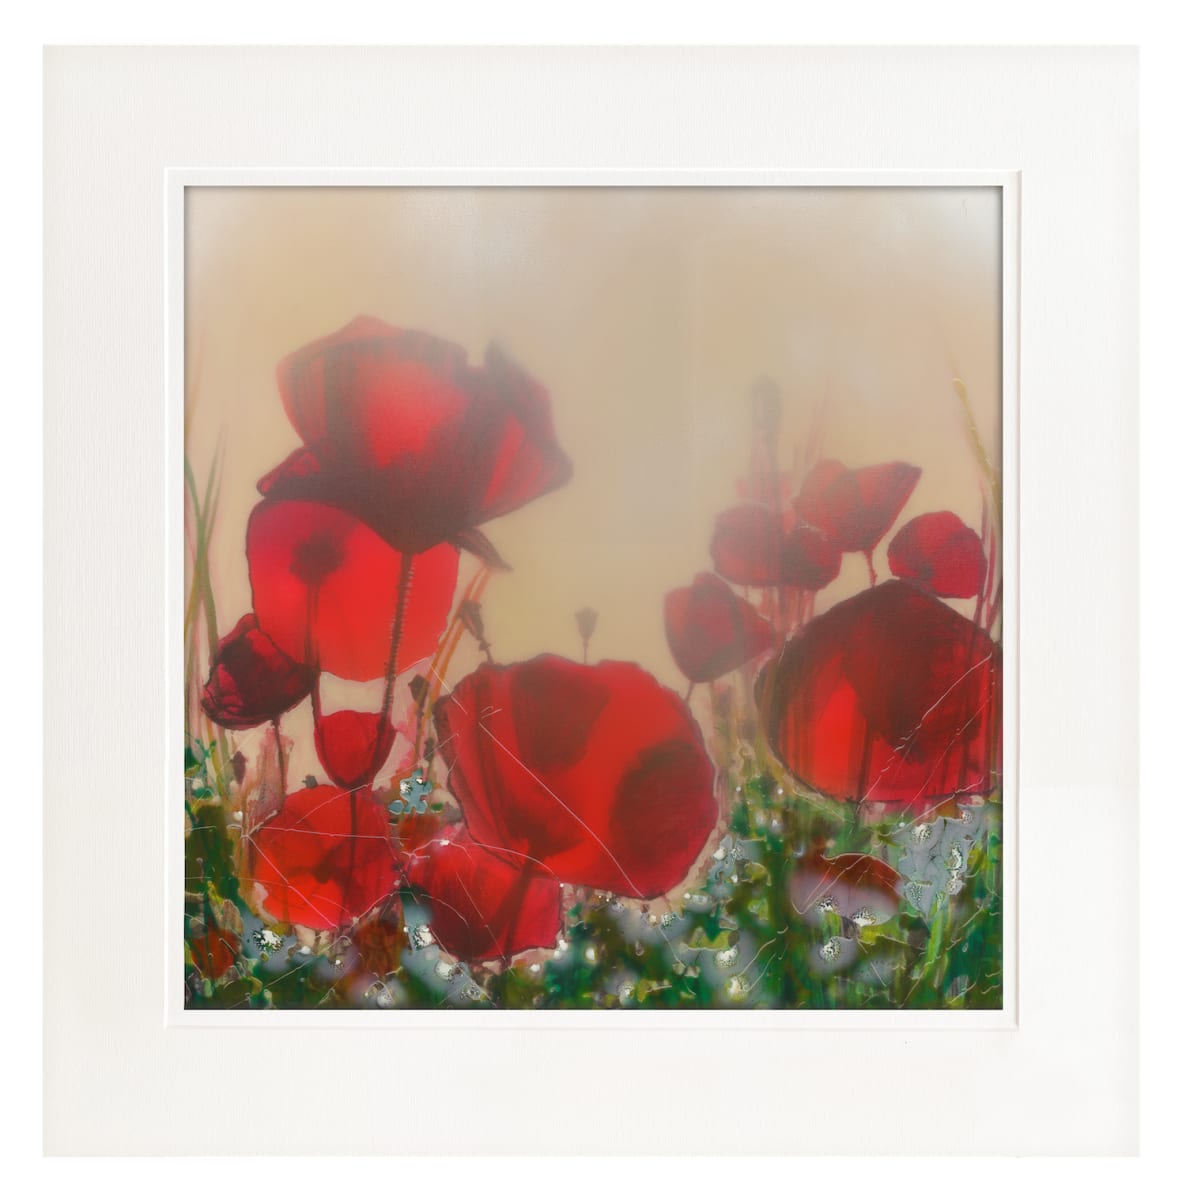 Wall art prints | Limited Edition Print | Poppy Haze - Signed Limited Edition Print with mount (unframed) - 150 in edition 4/150 